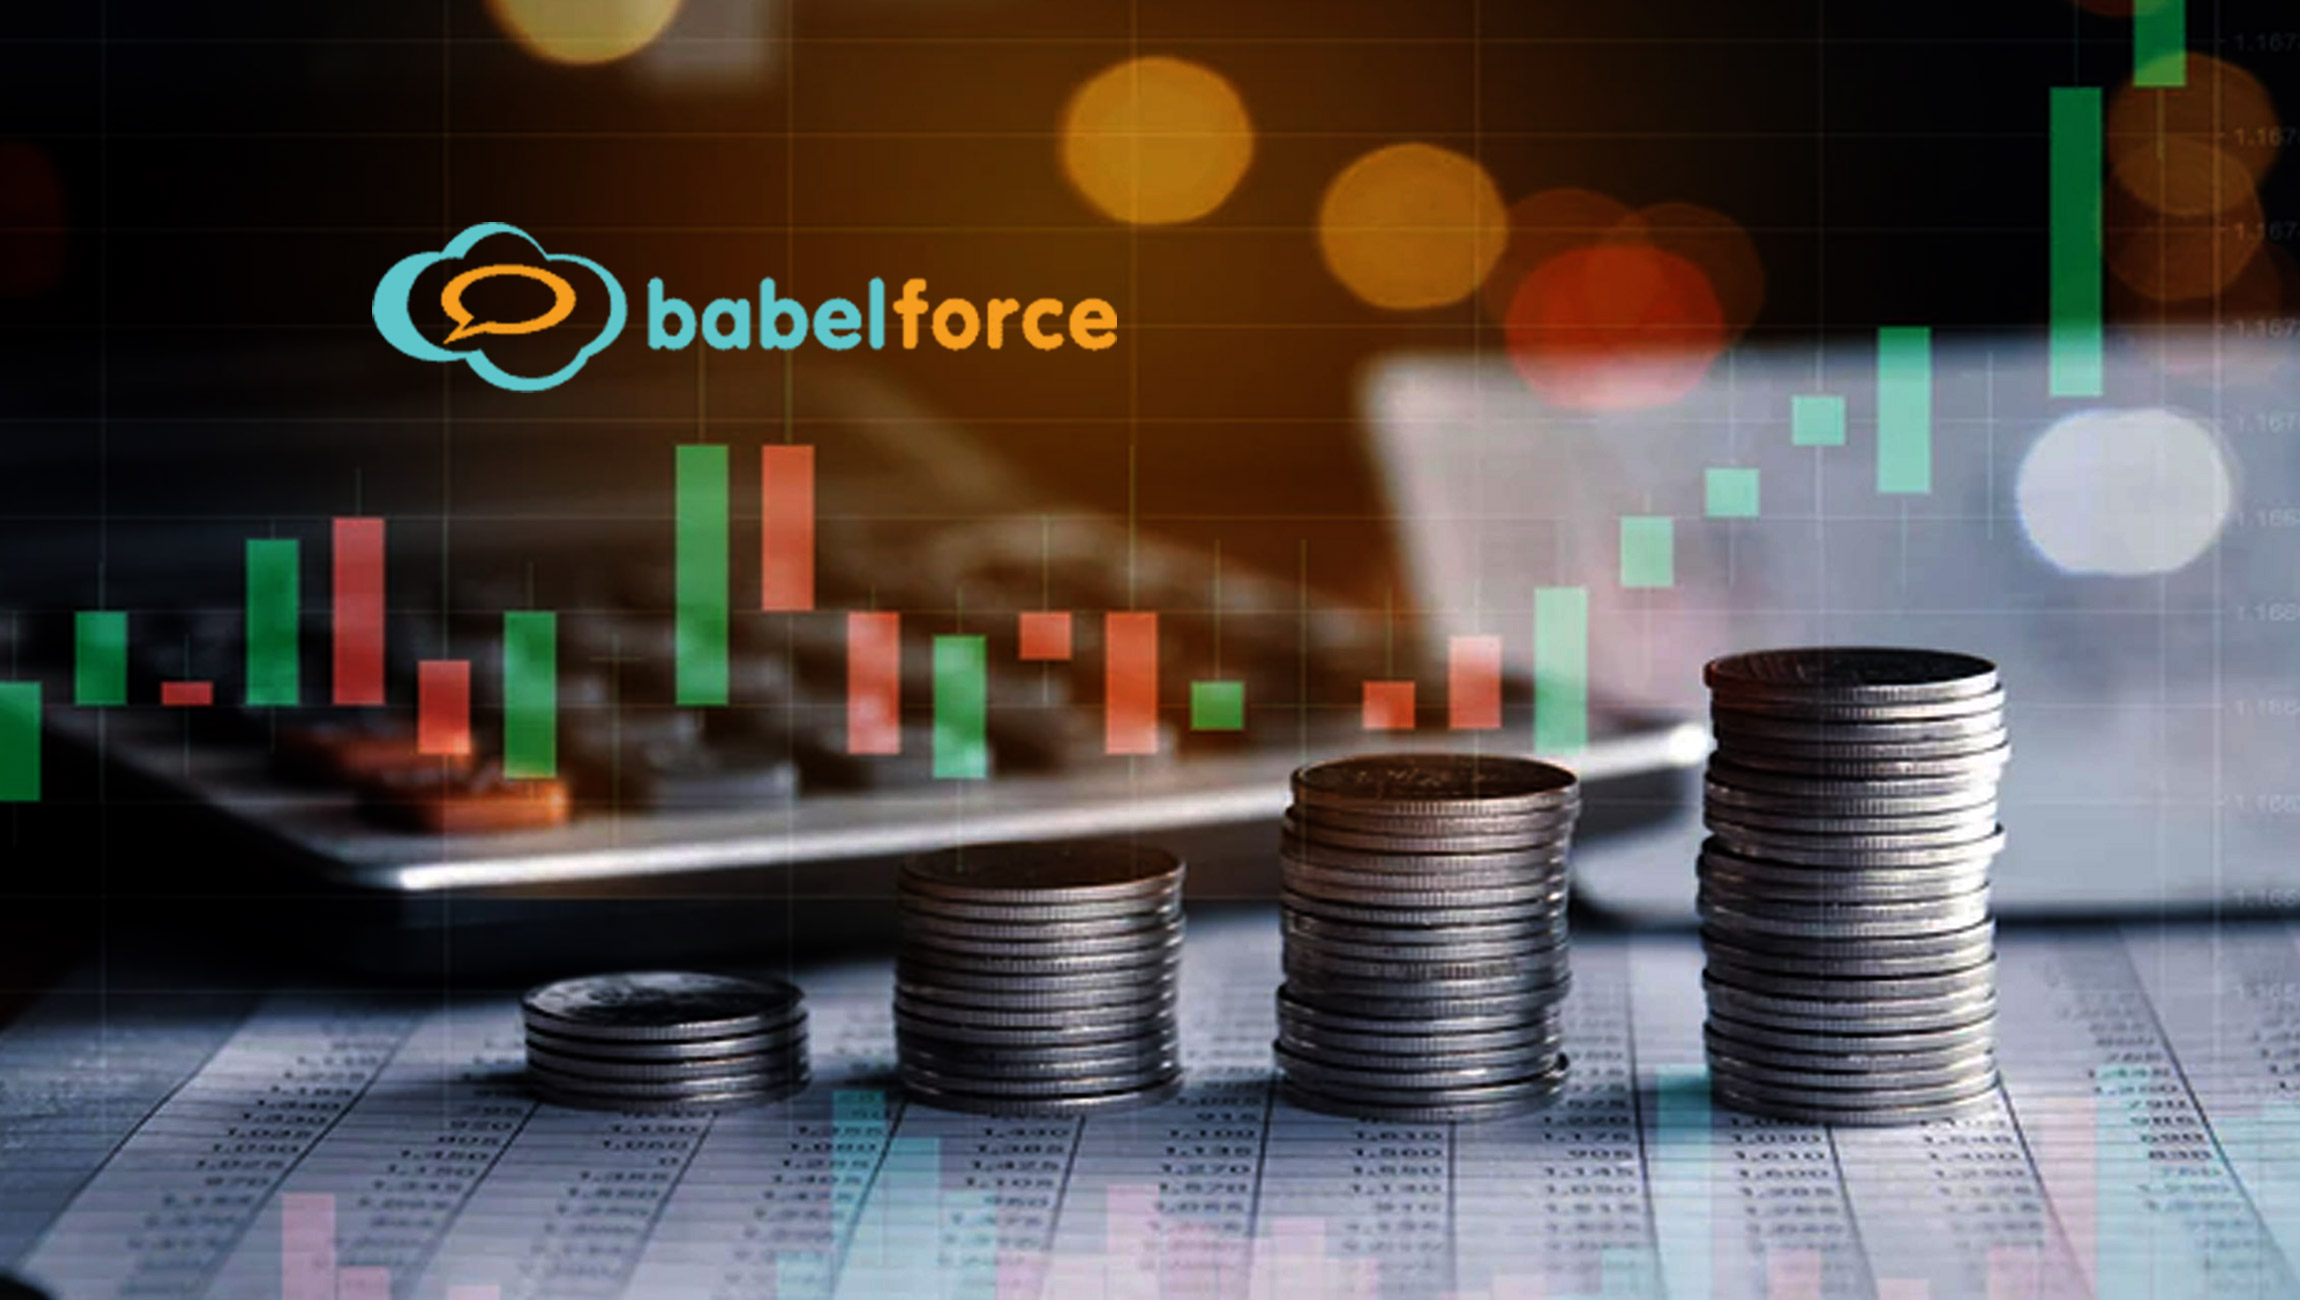 babelforce Closes €4 Million Funding Round to Make Customer Service Fast, Affordable, and Flexible